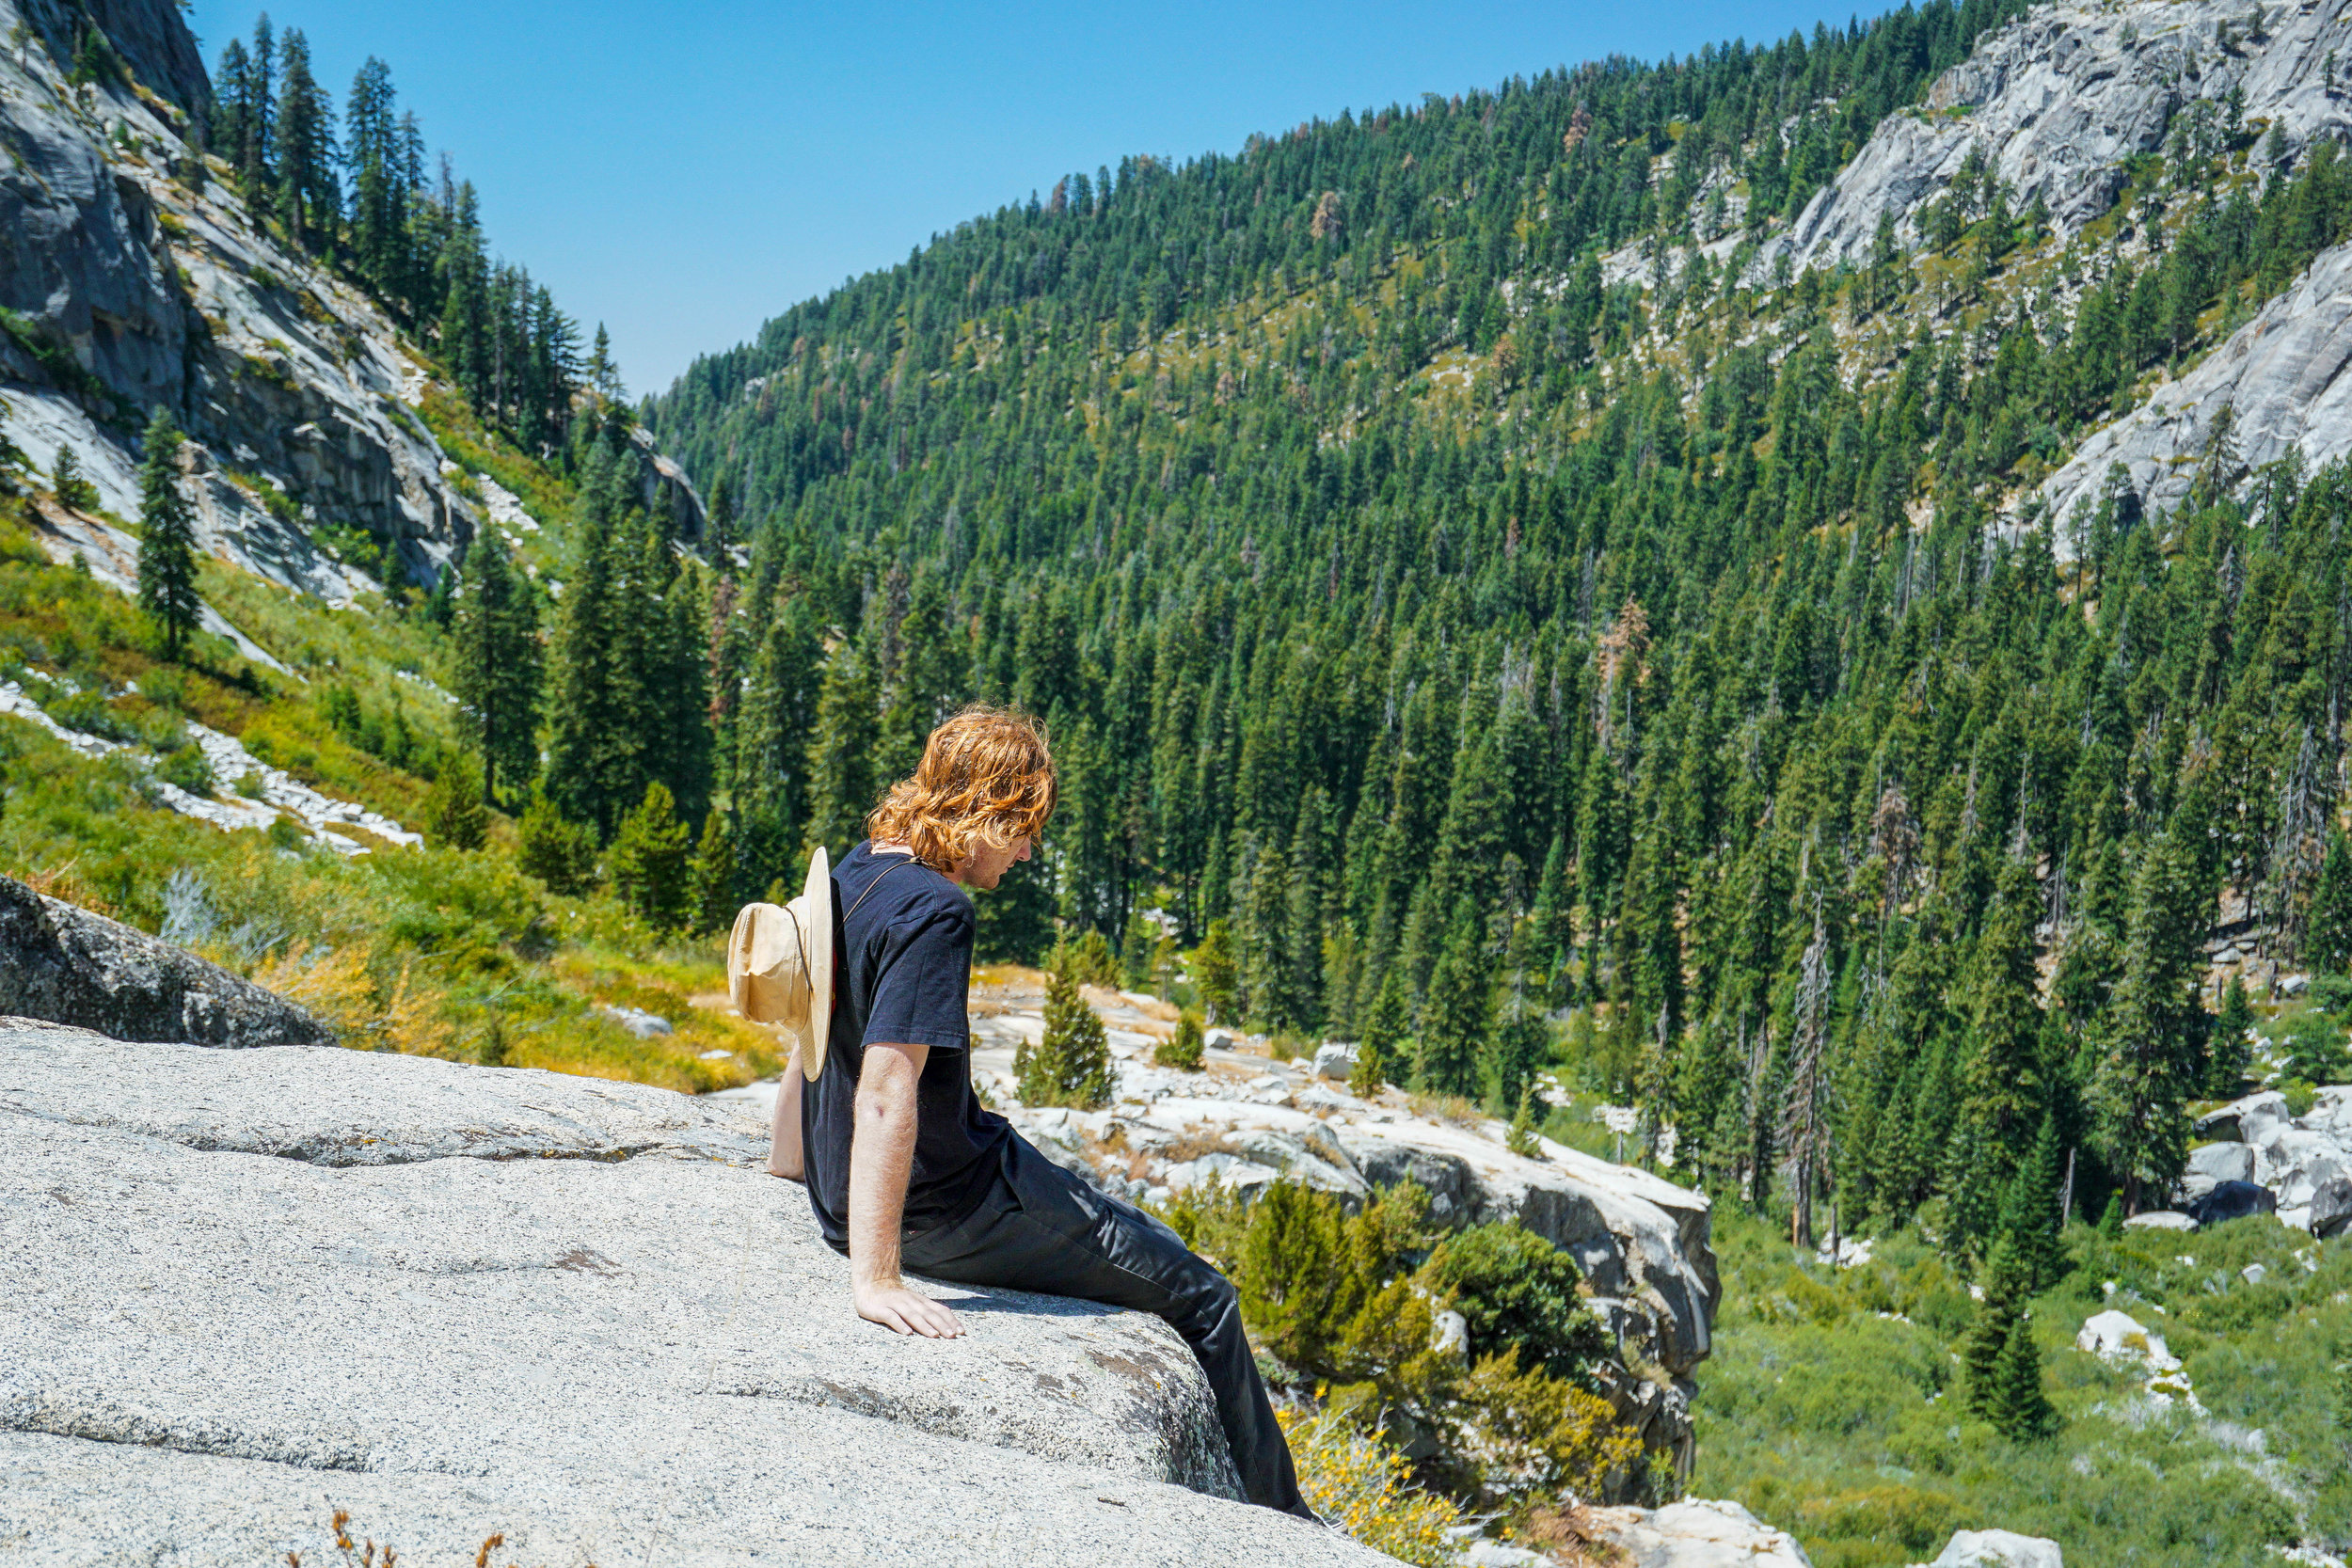 During early spring water from the falls roars over this cliff, but by late summer its the perfect perch to soak up the magic of the Sierras.